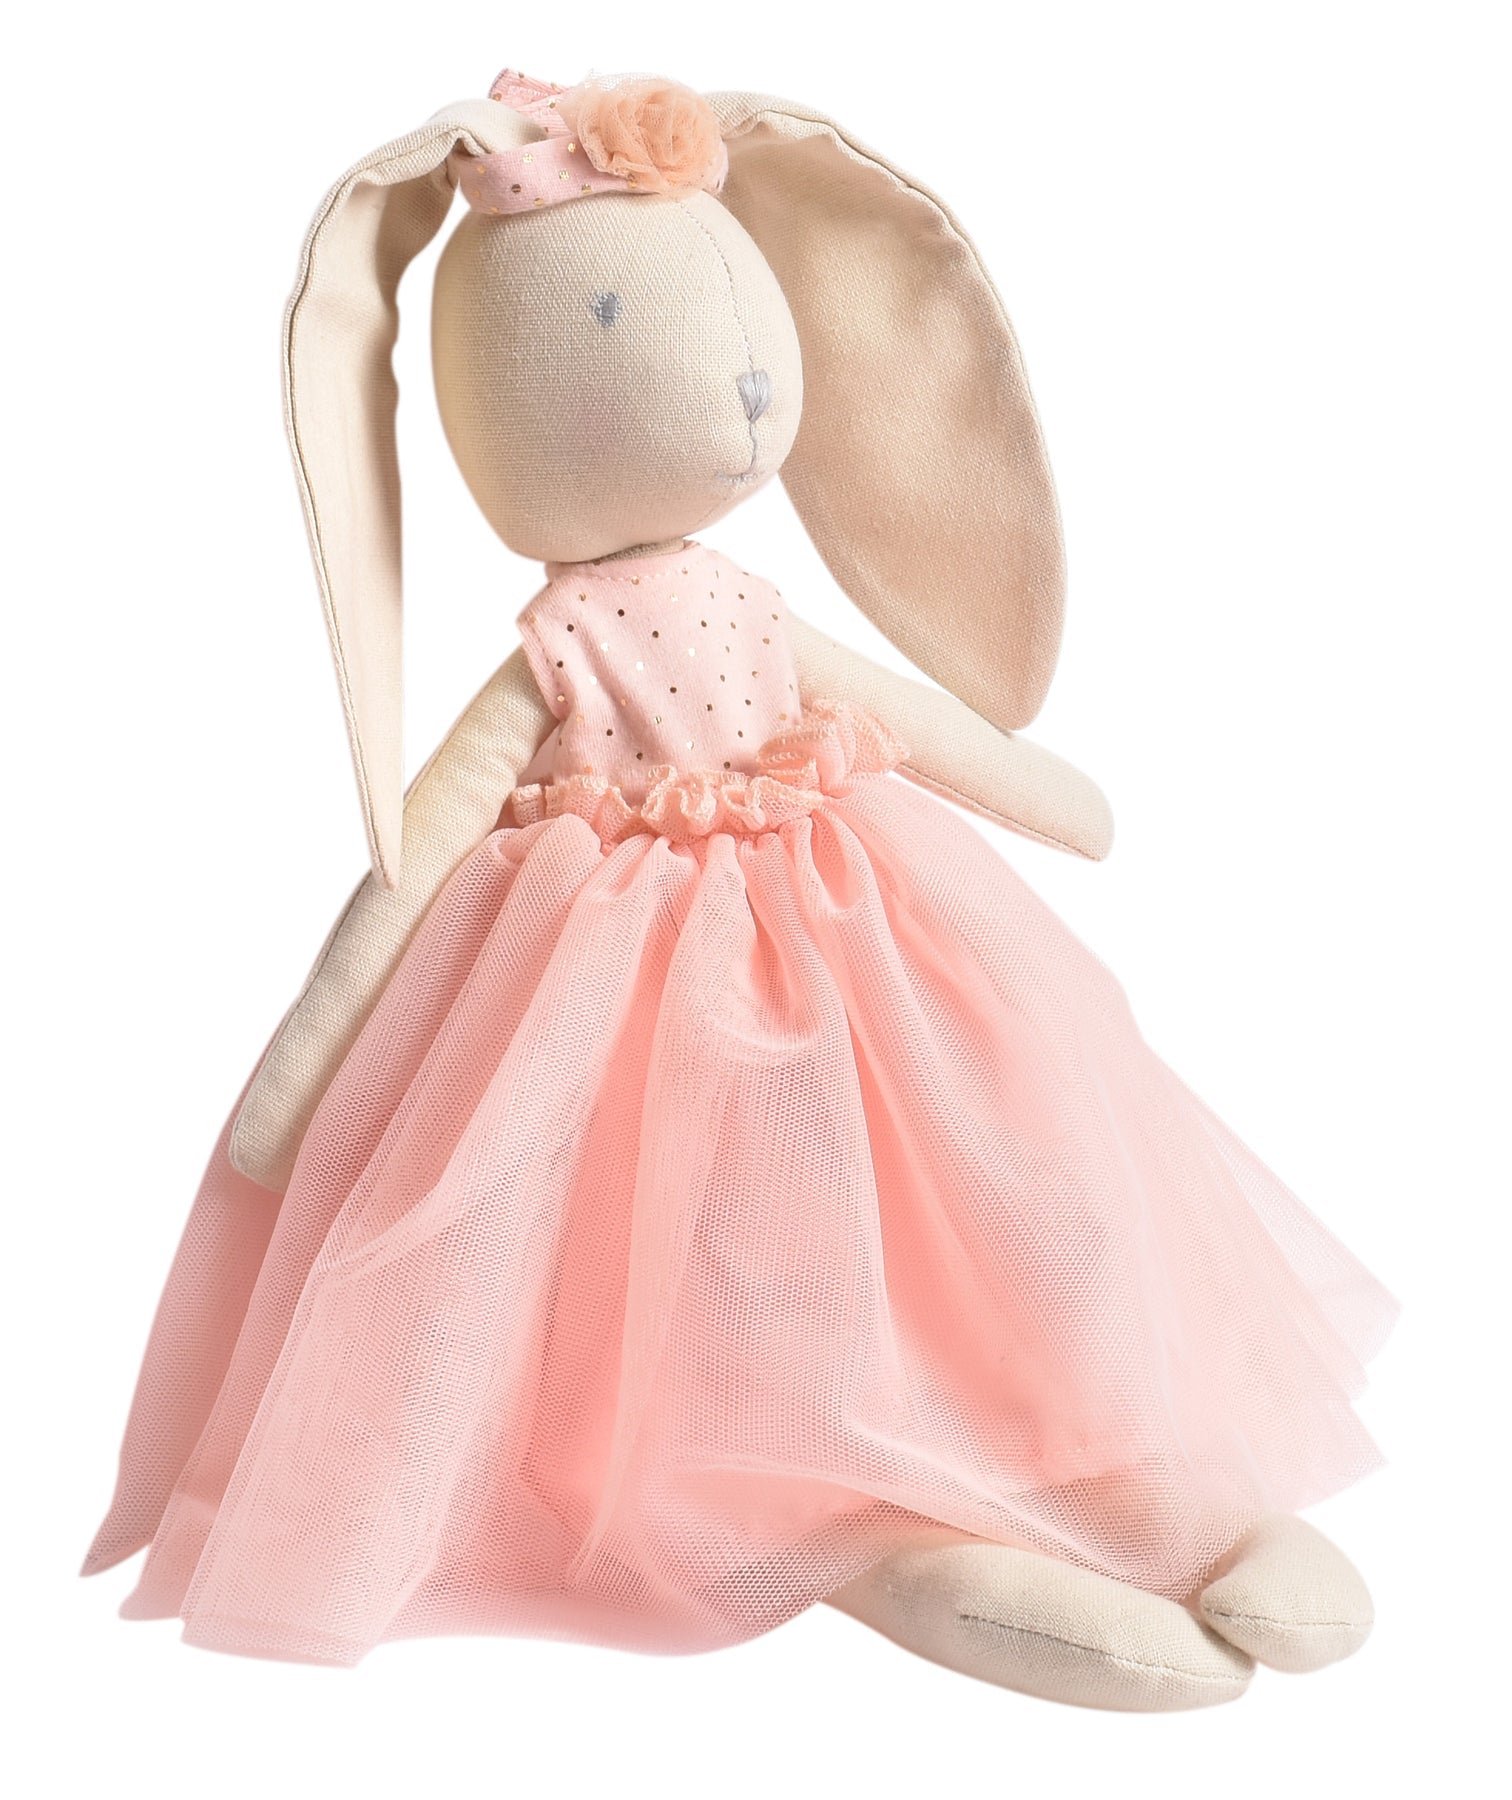 Marcella the Bunny Ballerina in Pink Toile Skirt - Twinkle Twinkle Little One